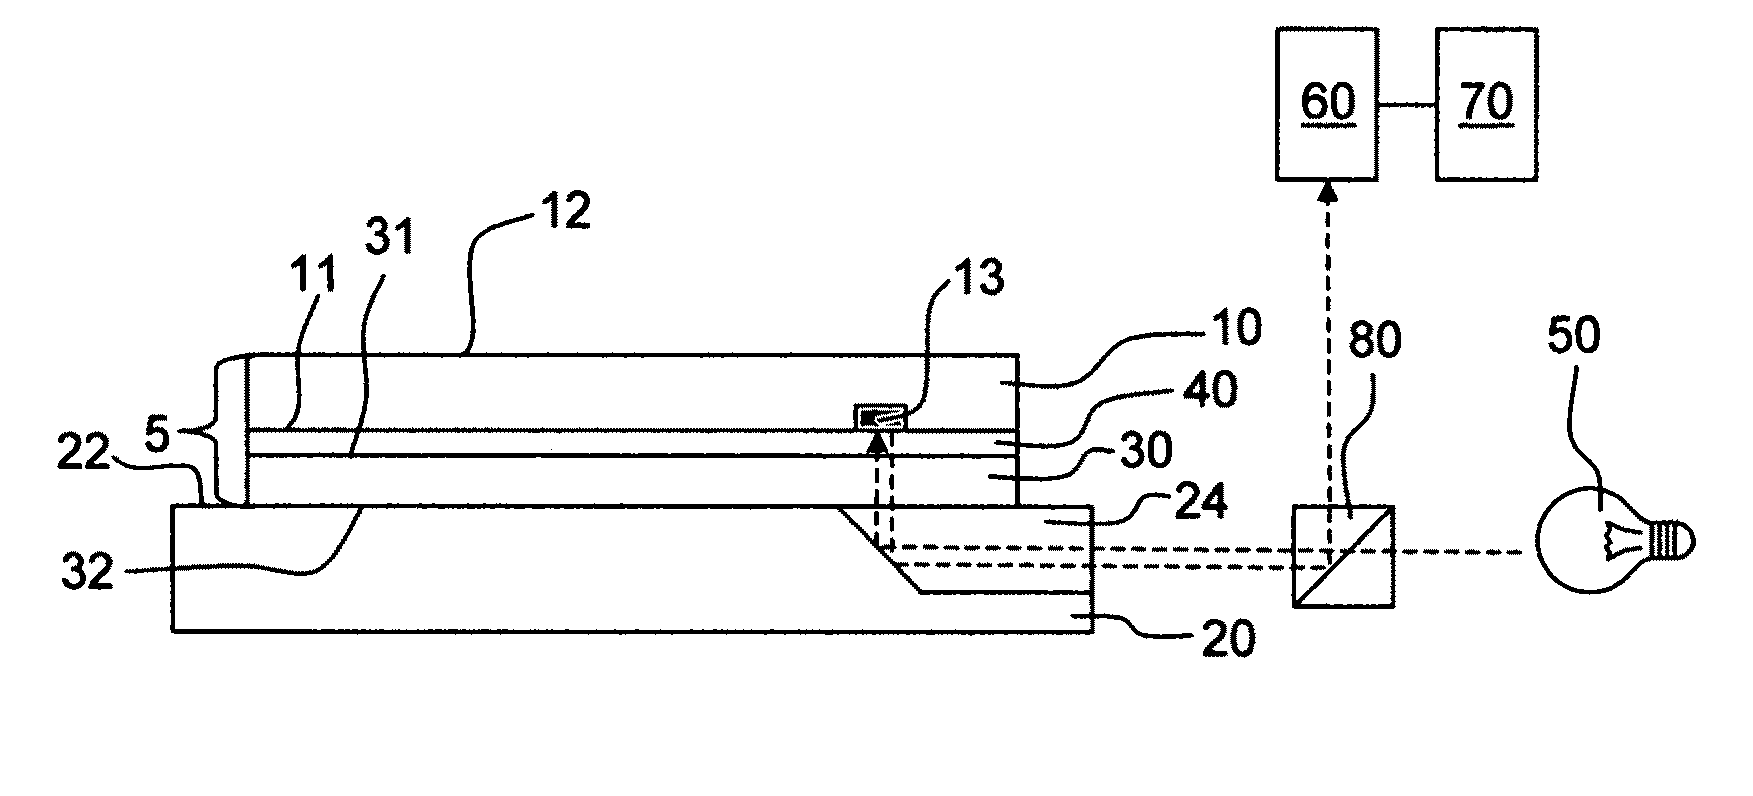 Substrate-alignment using detector of substrate material